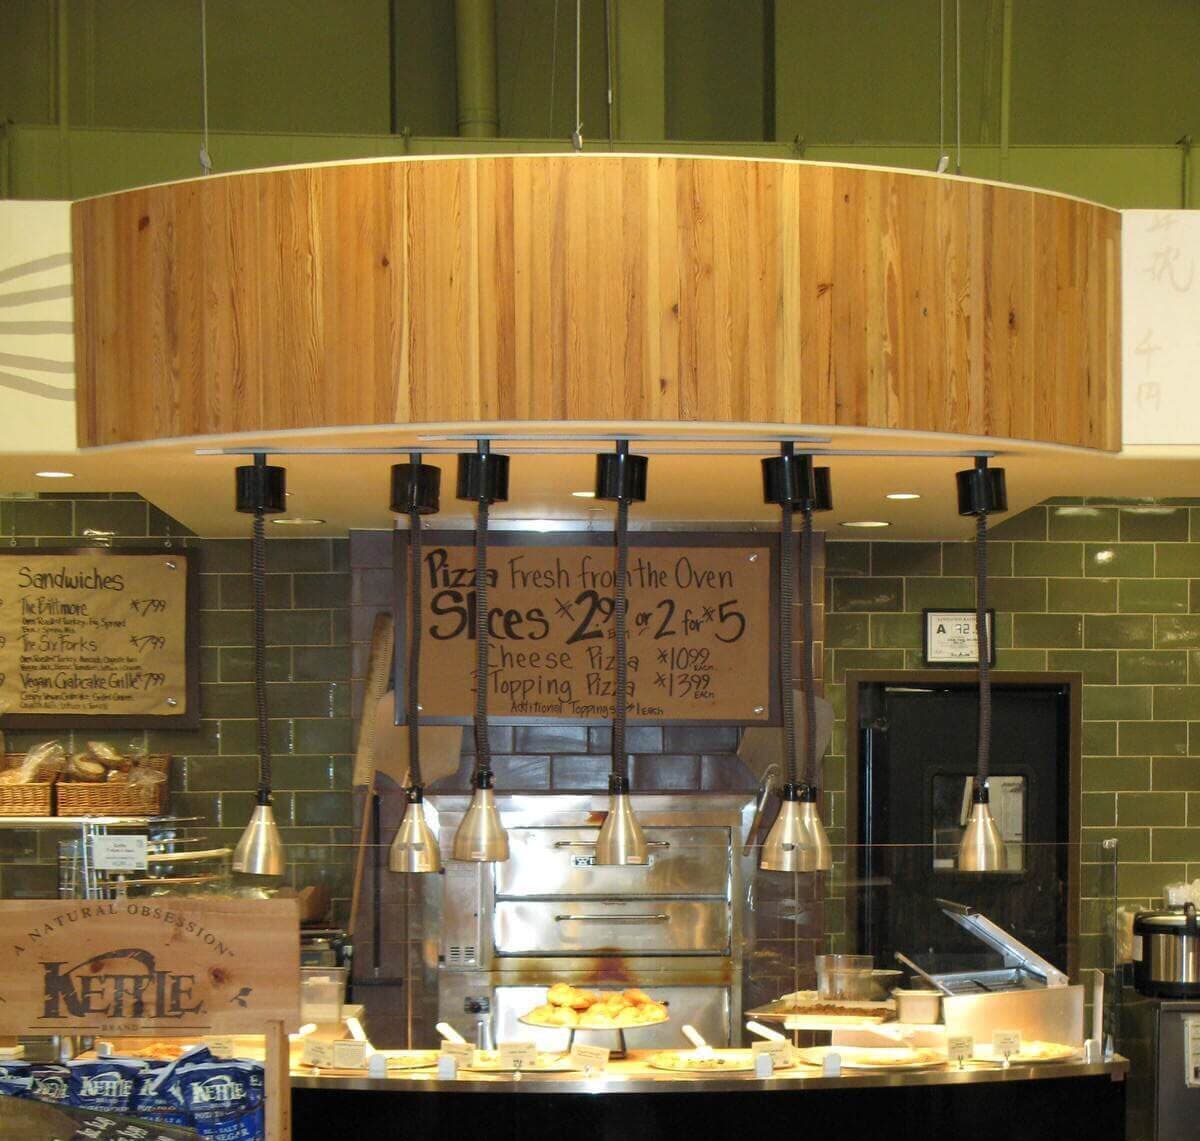 Wood paneling accent feature in whole foods in Raleigh NC.